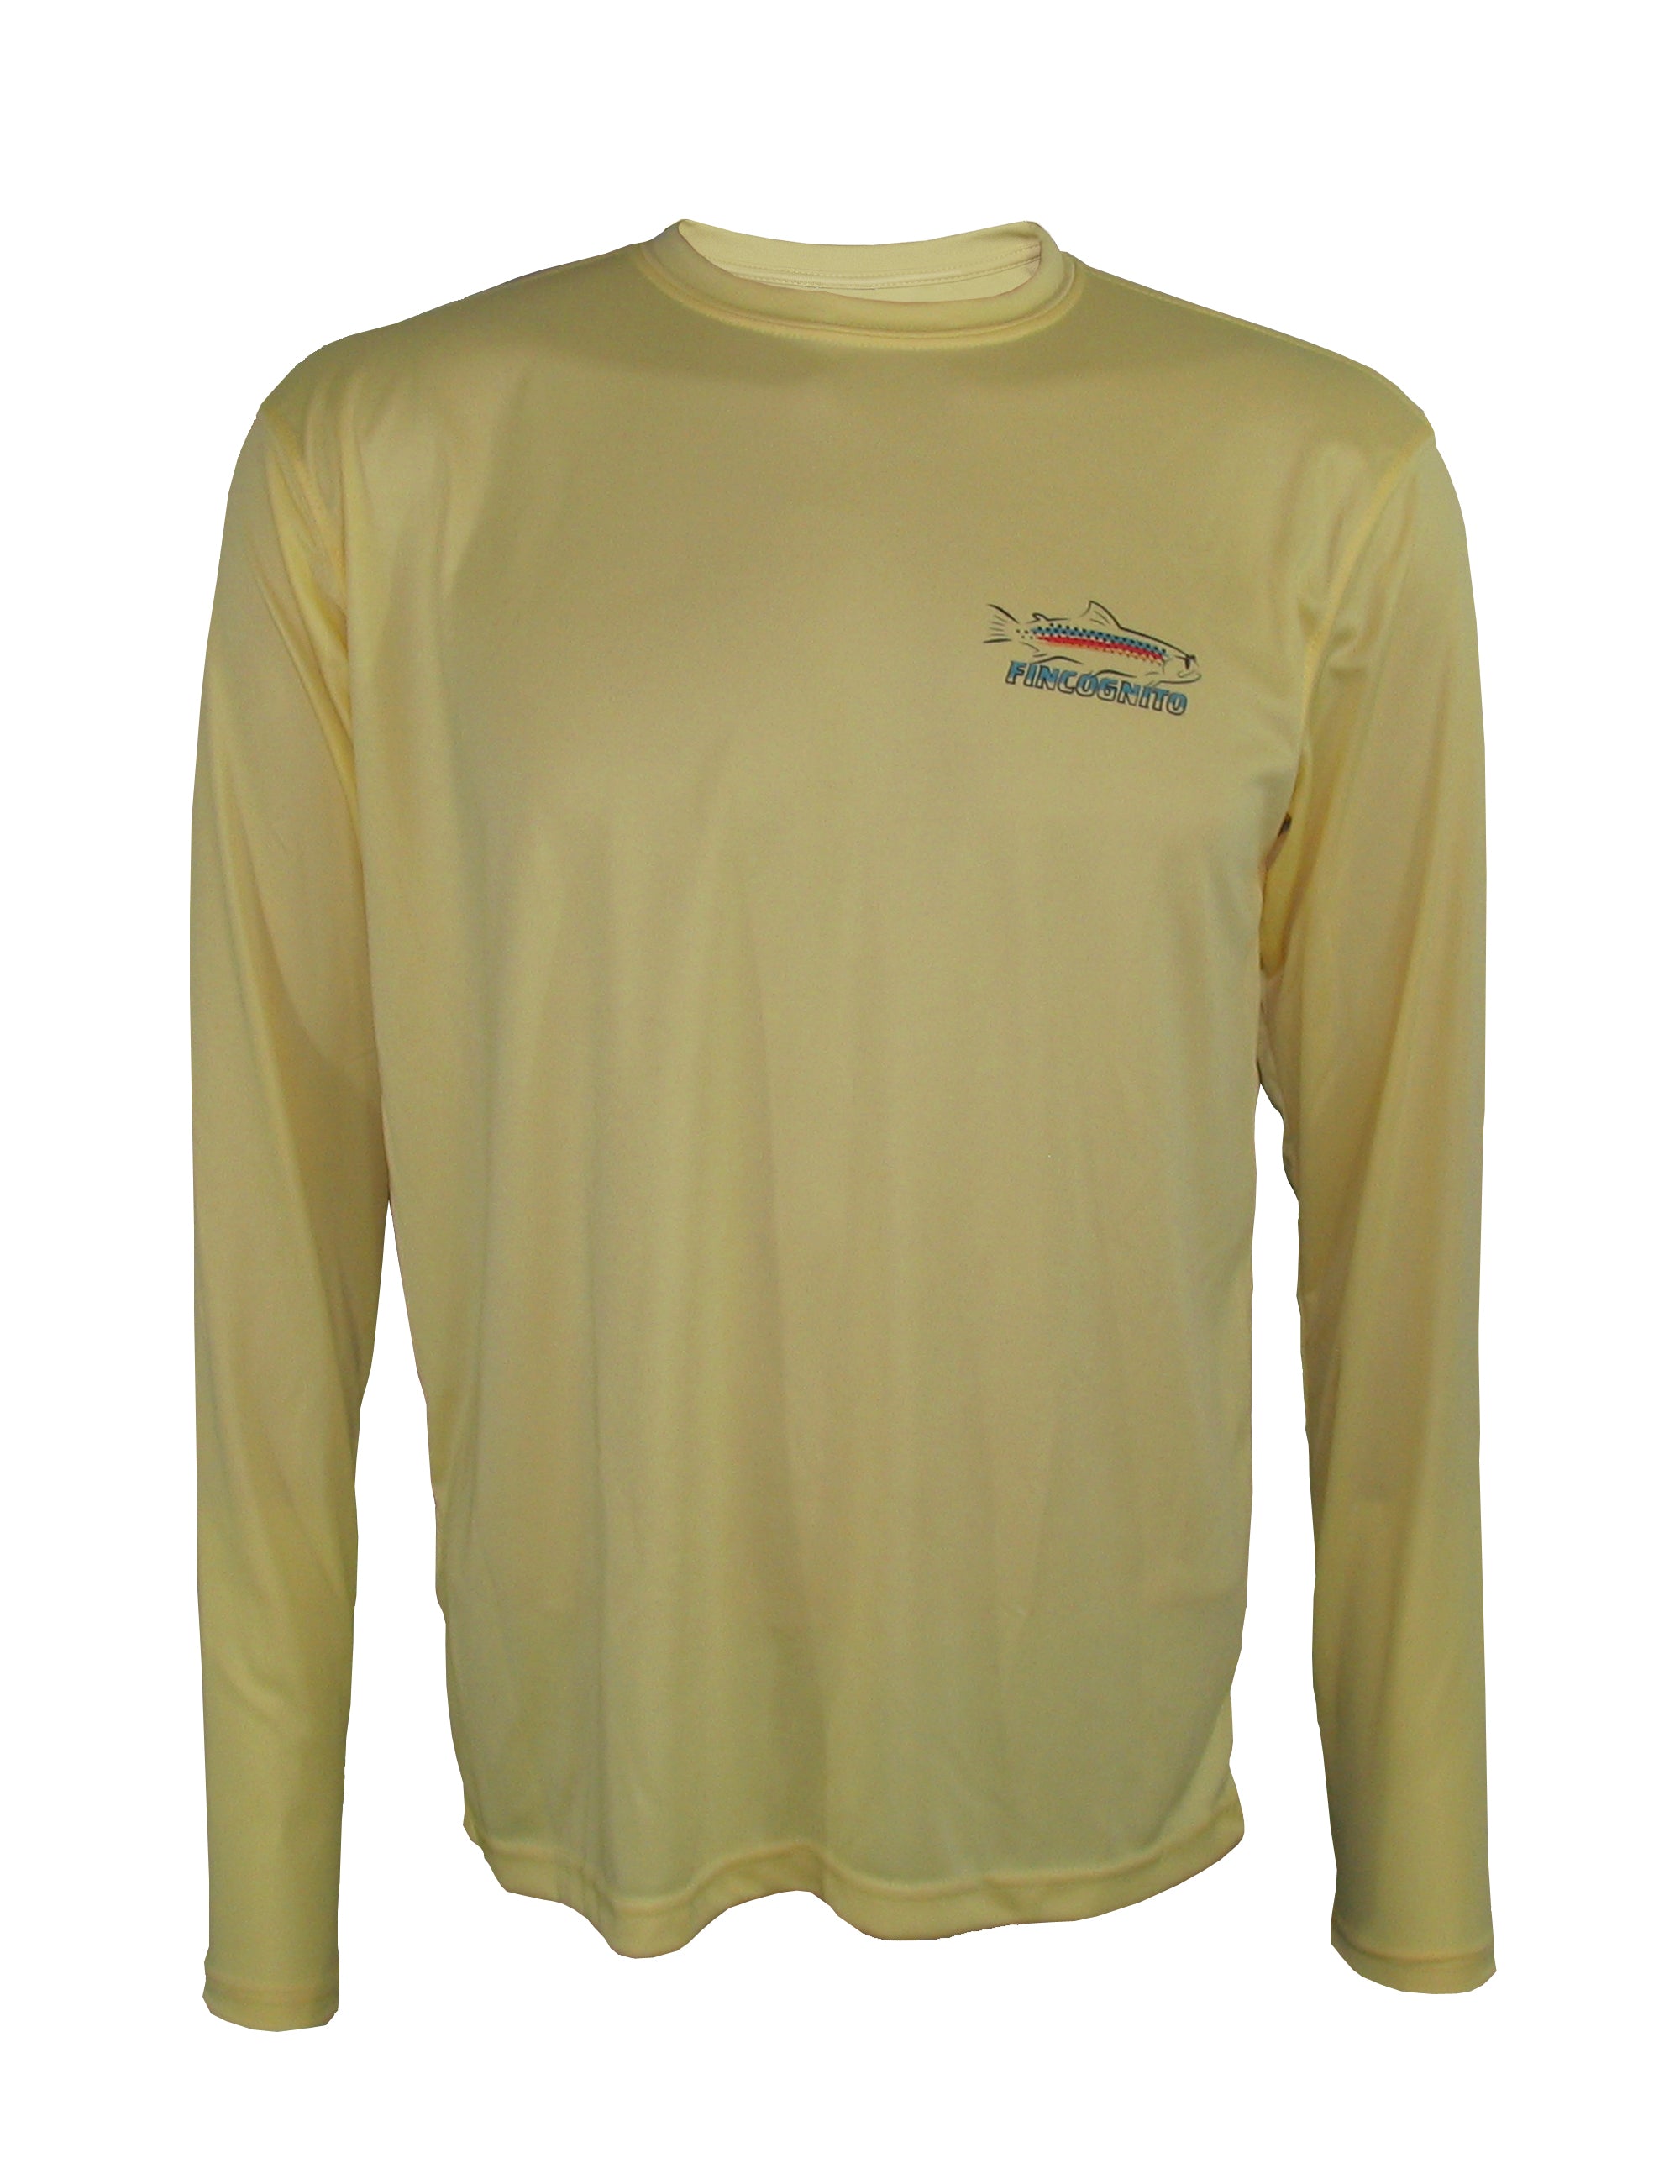 Men's Sun Protective Fishing Shirt Brown Trout/Yellow Fishing Clothes -  Cognito Brands, Inc.